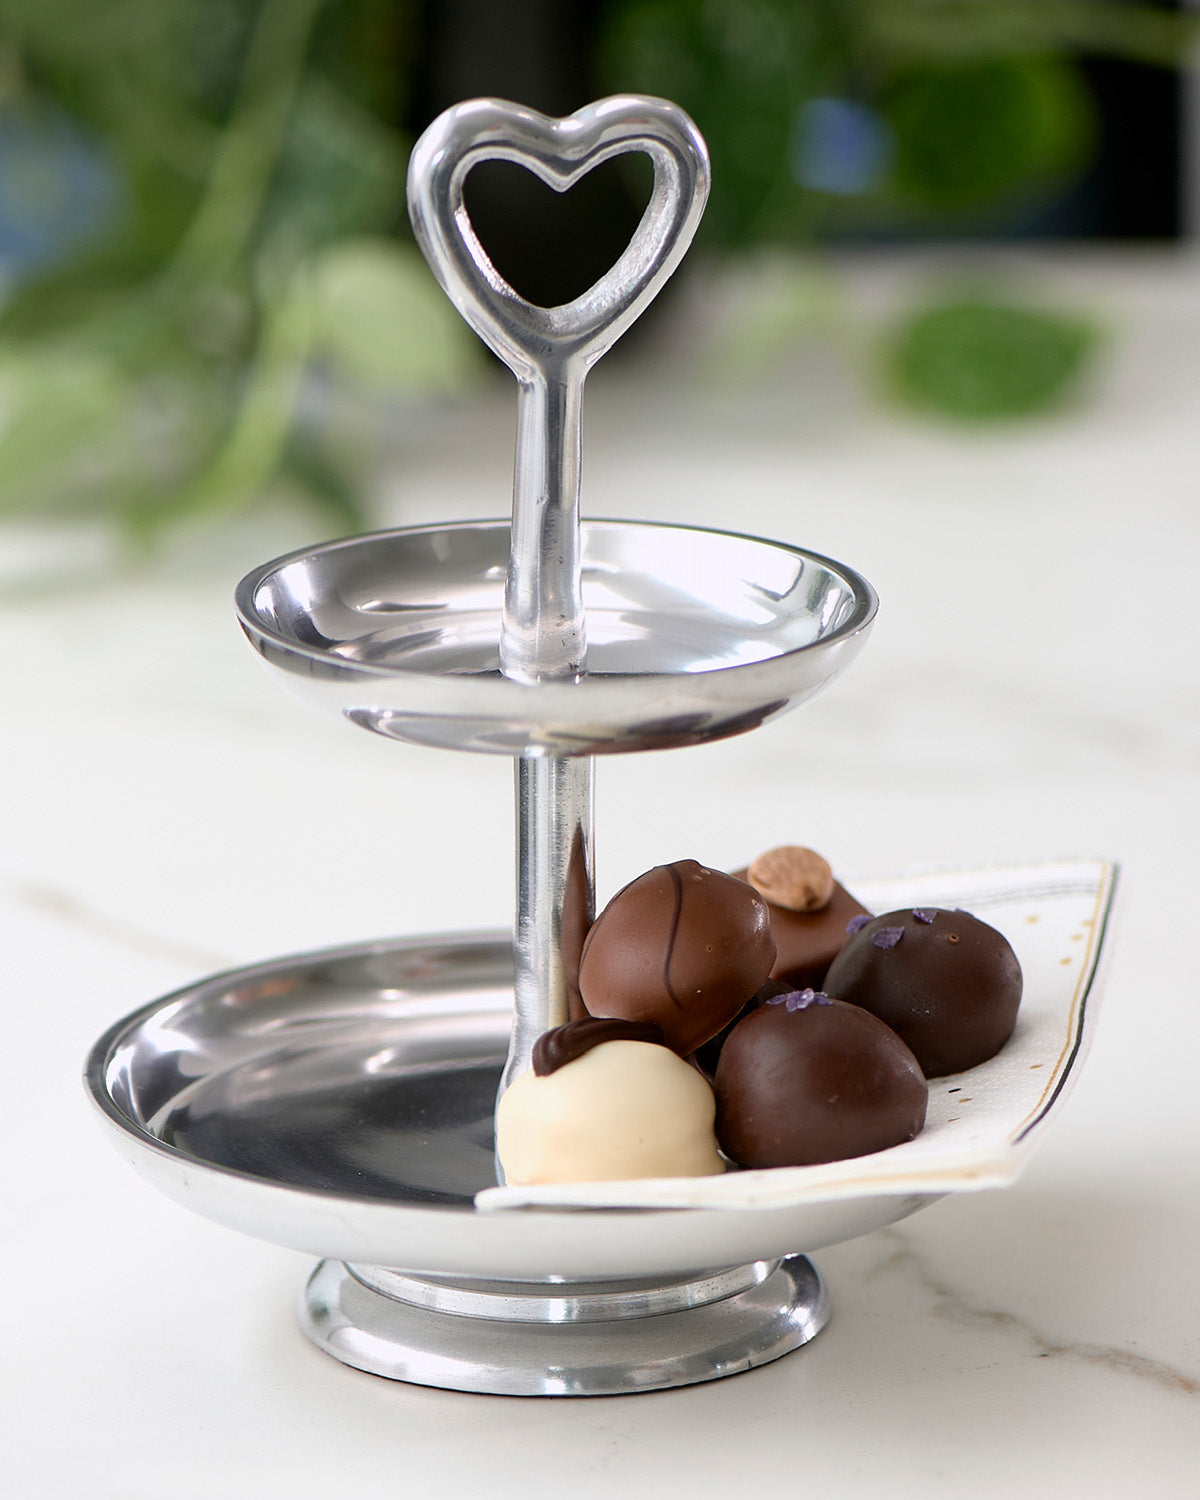 ETAGÈRE glossy aluminum heart-shaped carrier ring by Riviera Maison, decorated with sweets